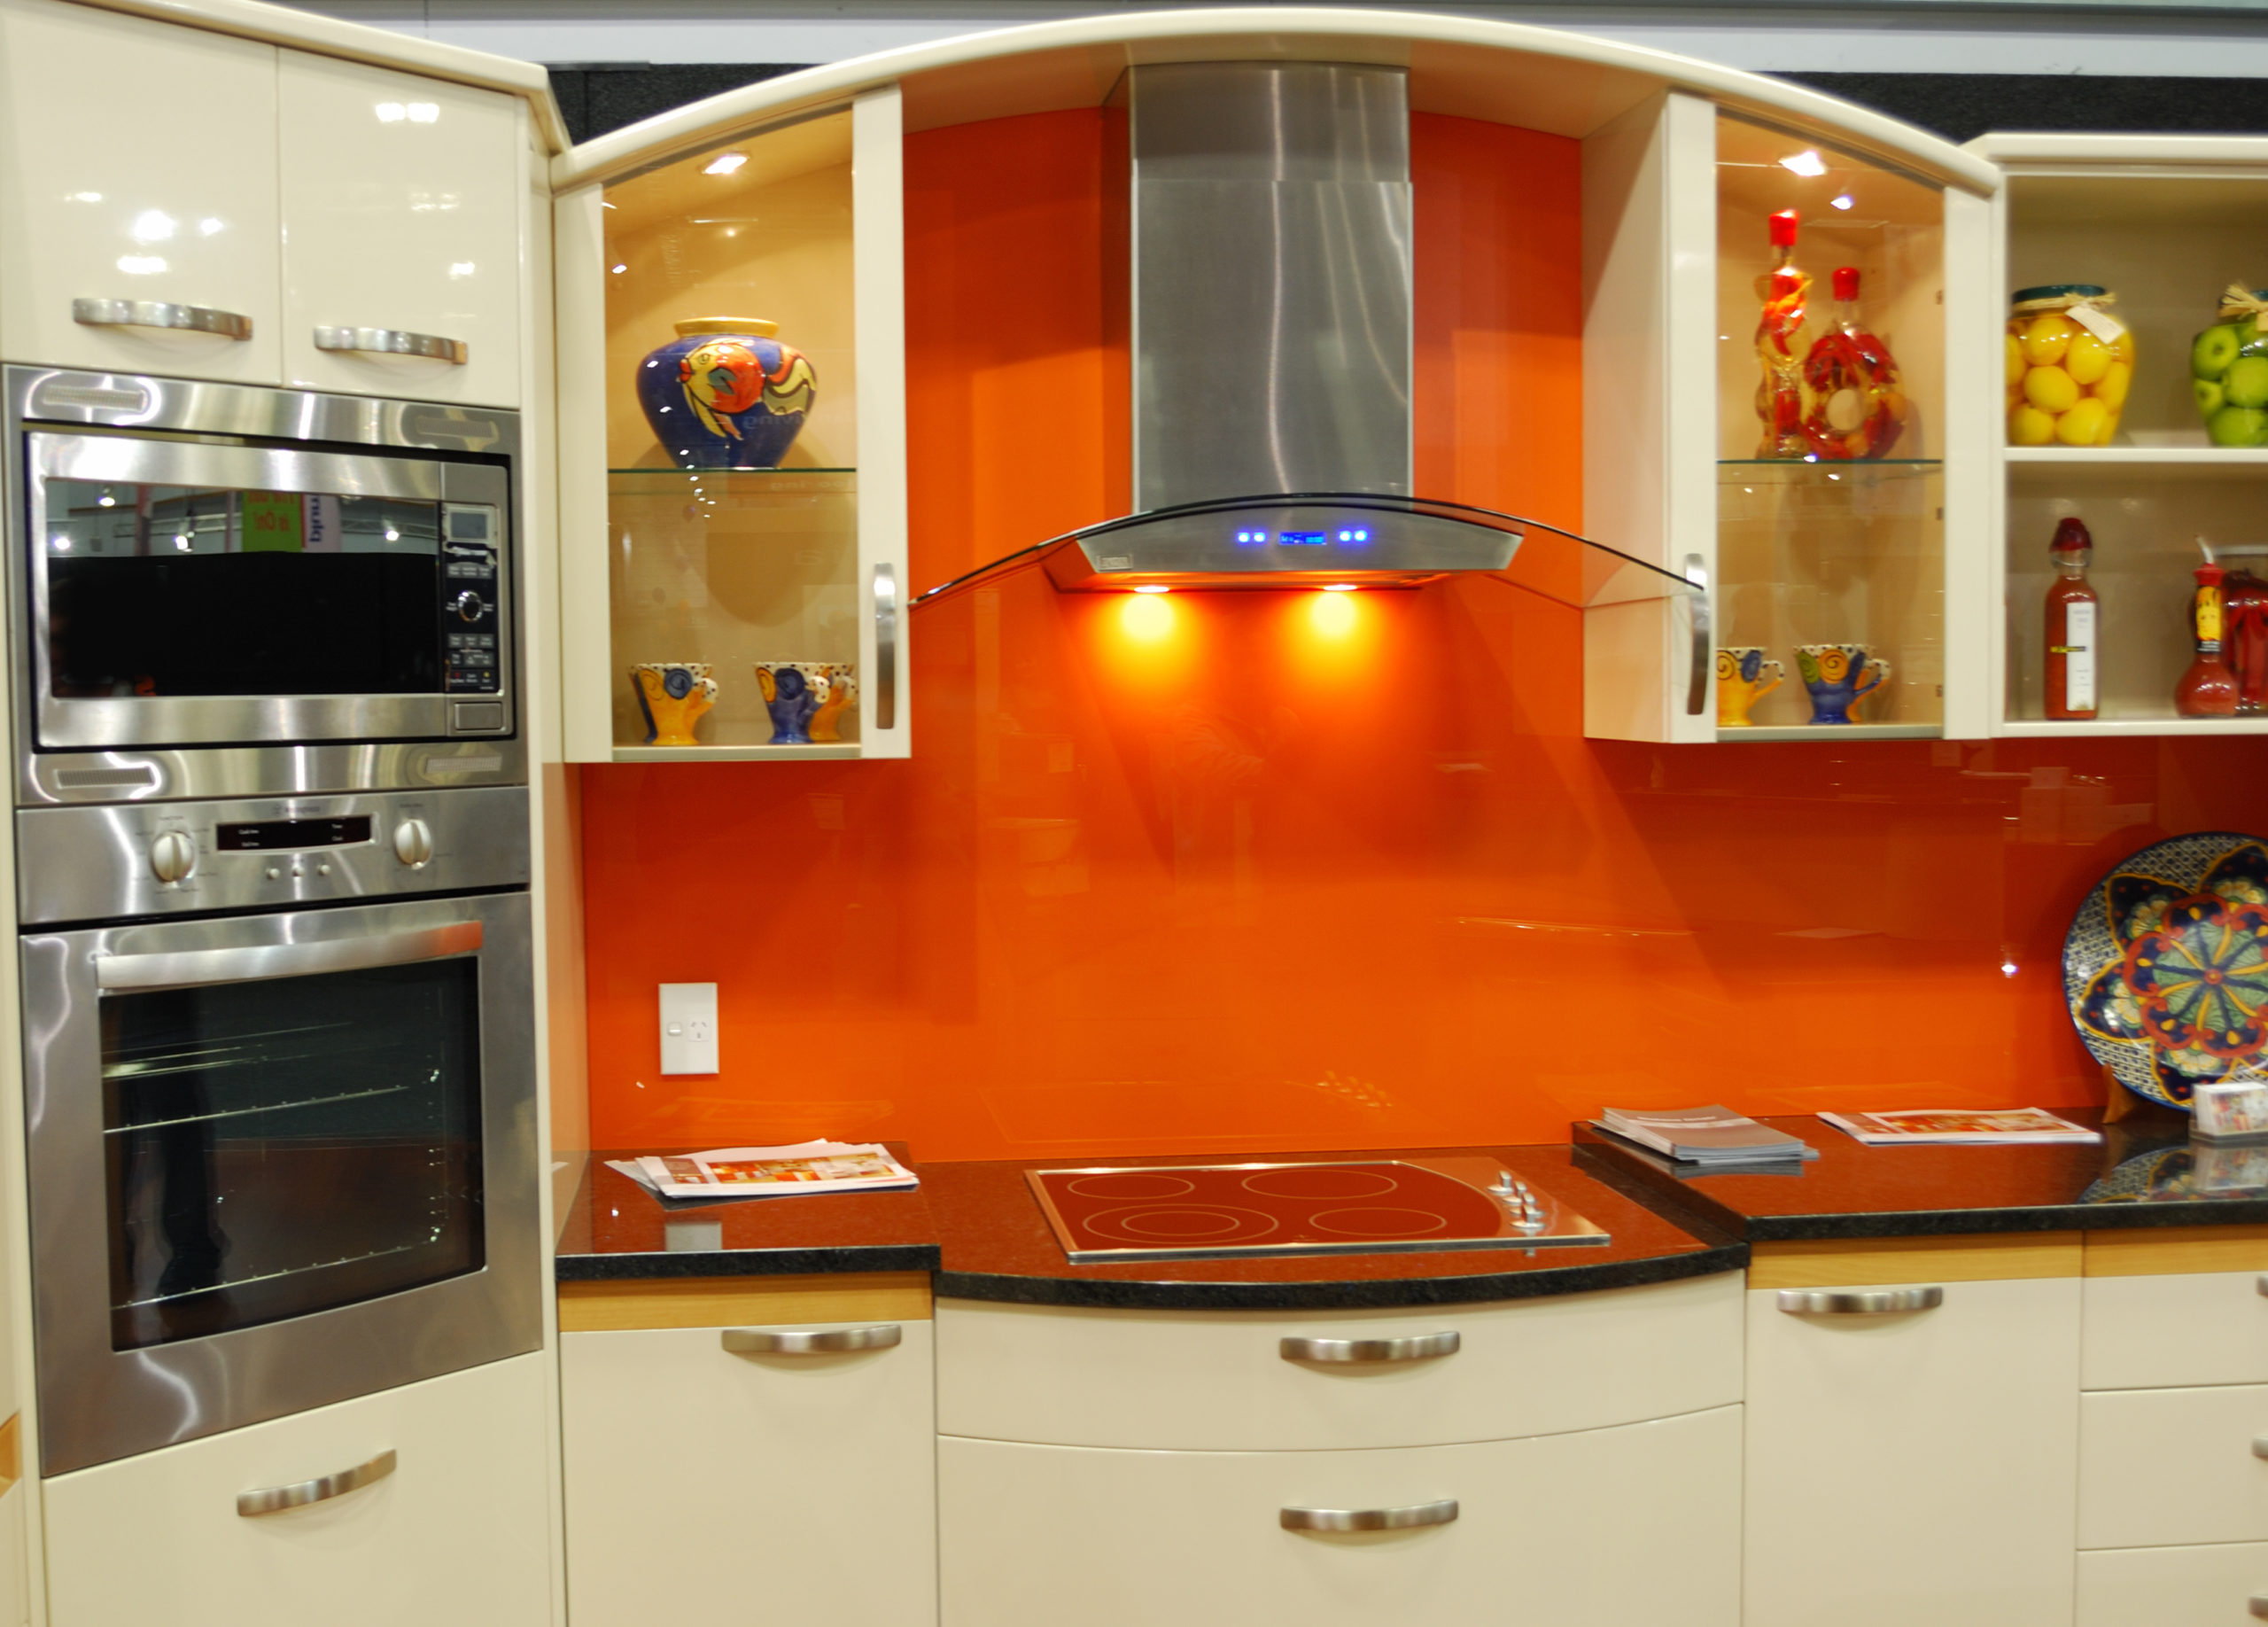 Give Your Kitchen a Colorful Makeover on the Cheap